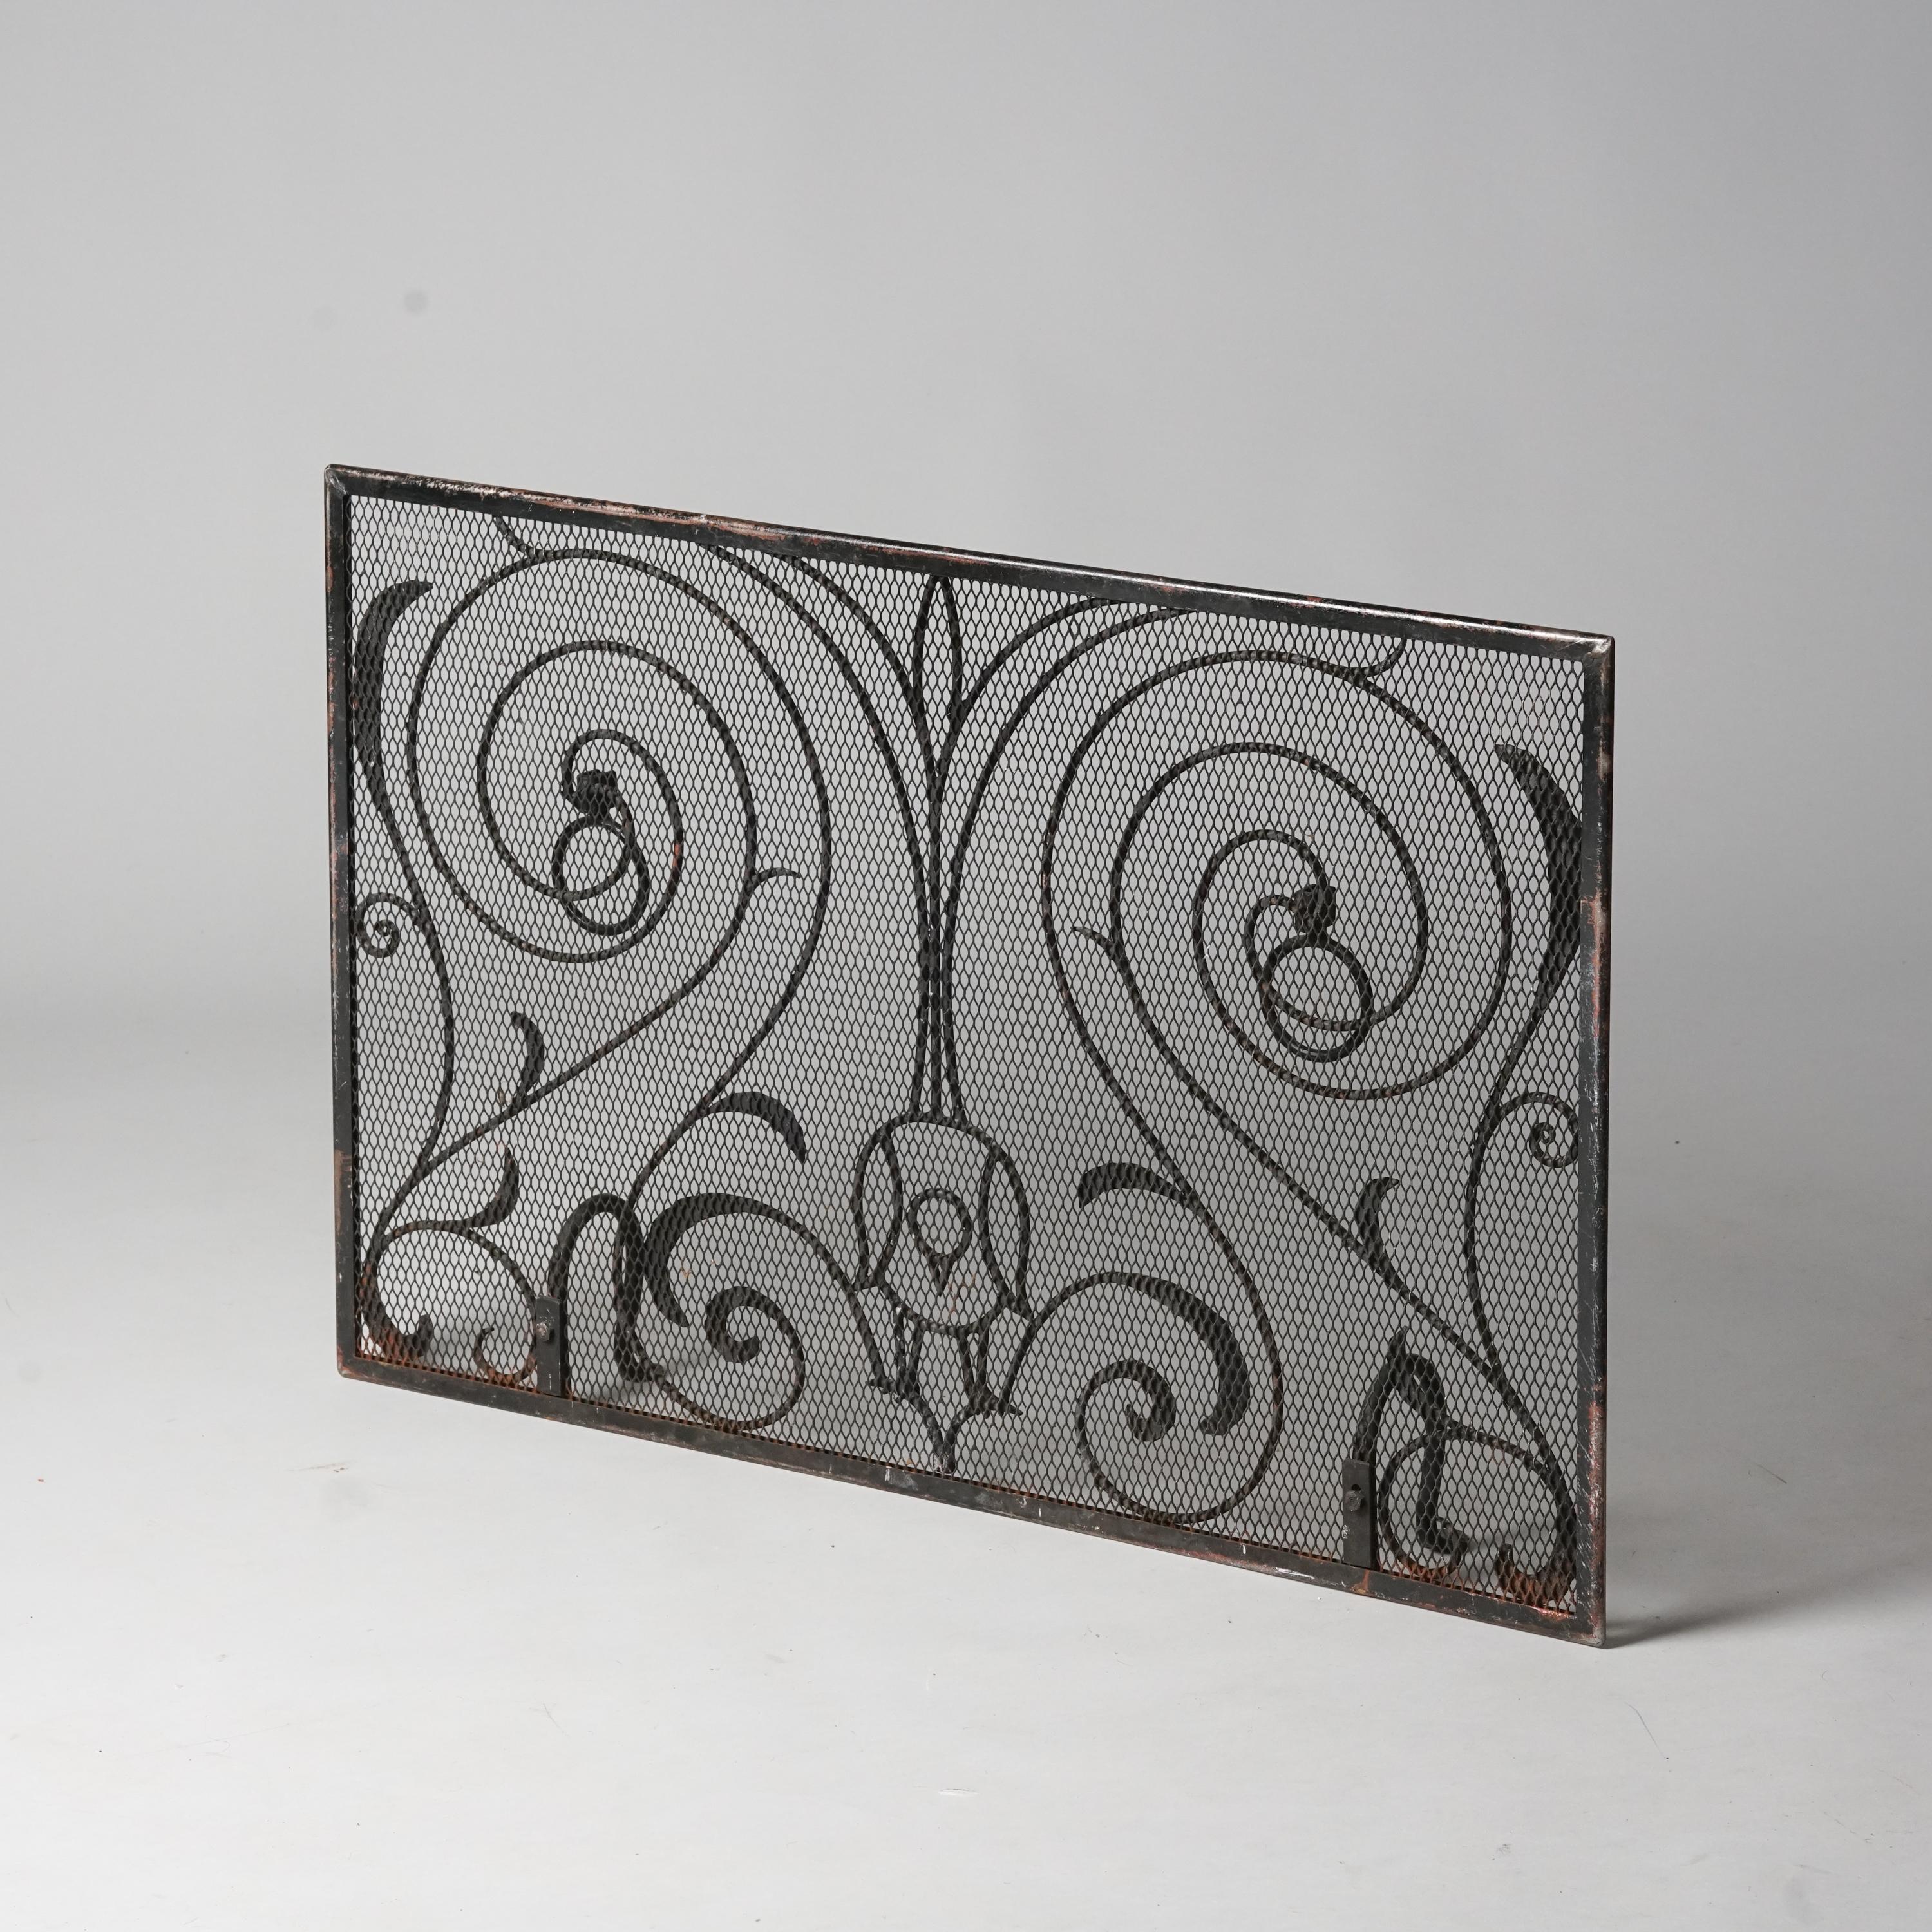 Fireplace screen, manufactured by Taidetakomo Hakkarainen, Early 20th Century. Forged iron. Good vintage condition, minor patina consistent with age and use. Beautiful detailed piece. 